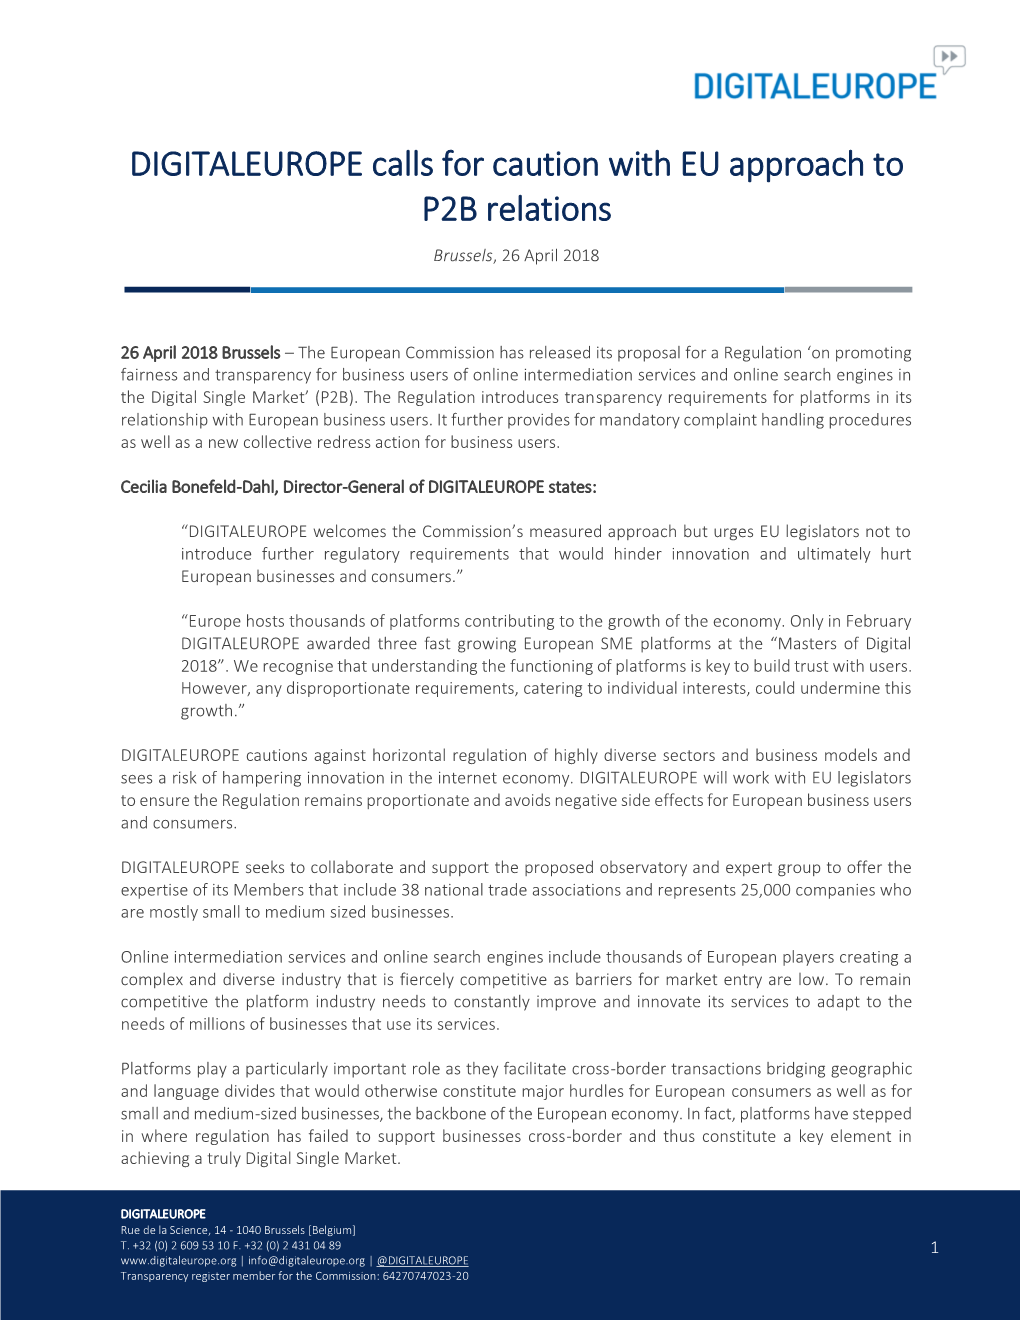 DIGITALEUROPE Calls for Caution with EU Approach to P2B Relations Brussels, 26 April 2018